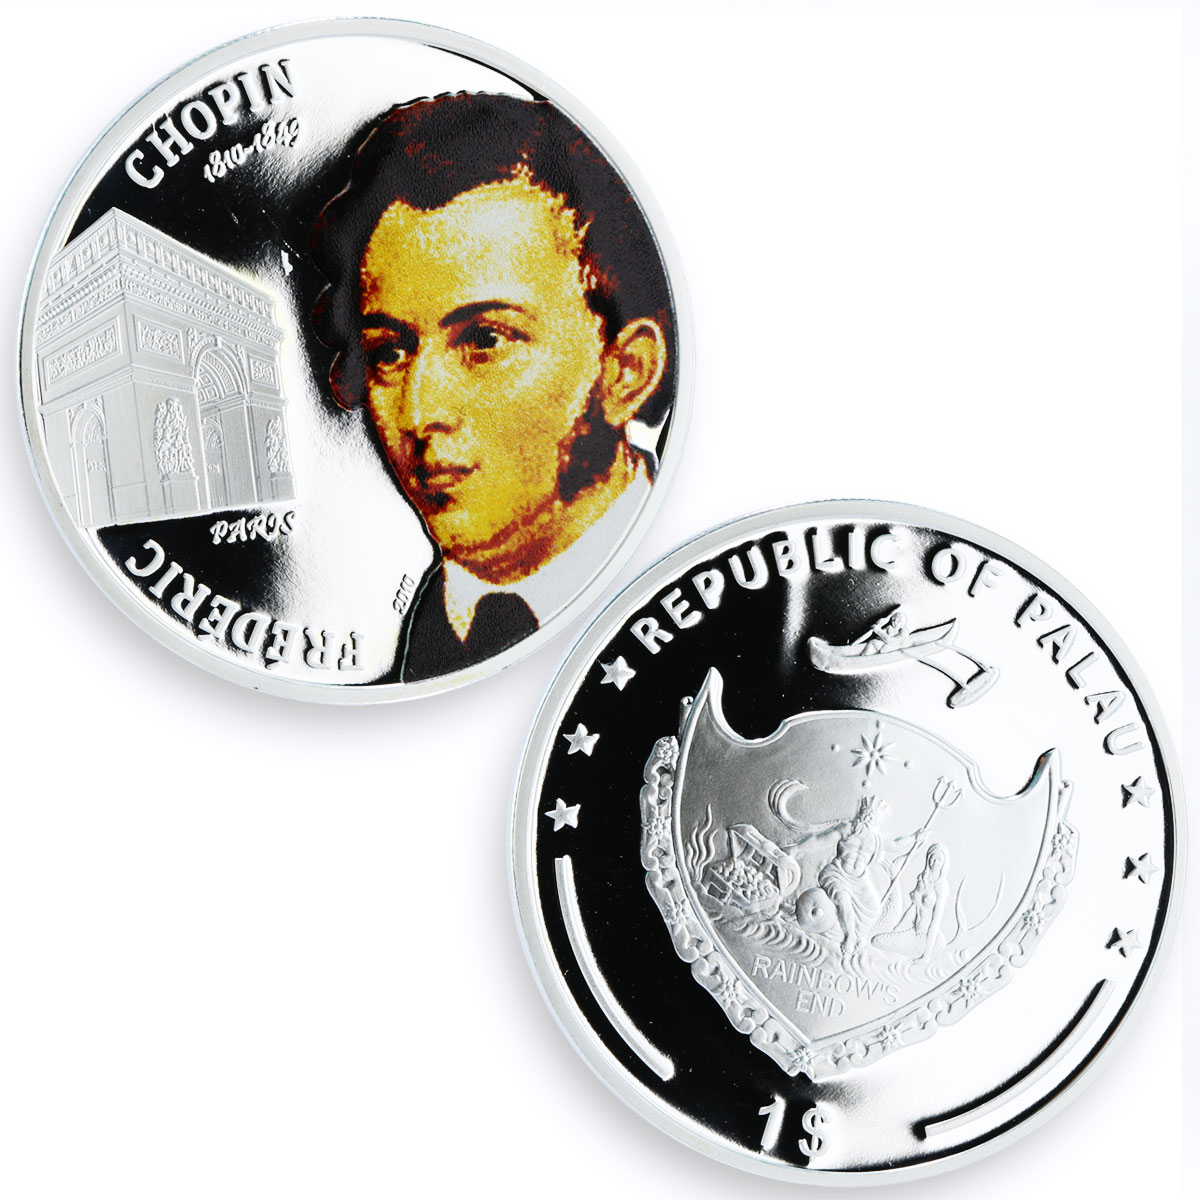 Palau set of 4 coins 200 Years to Frederic Chopin silverplated CuNi coins 2010